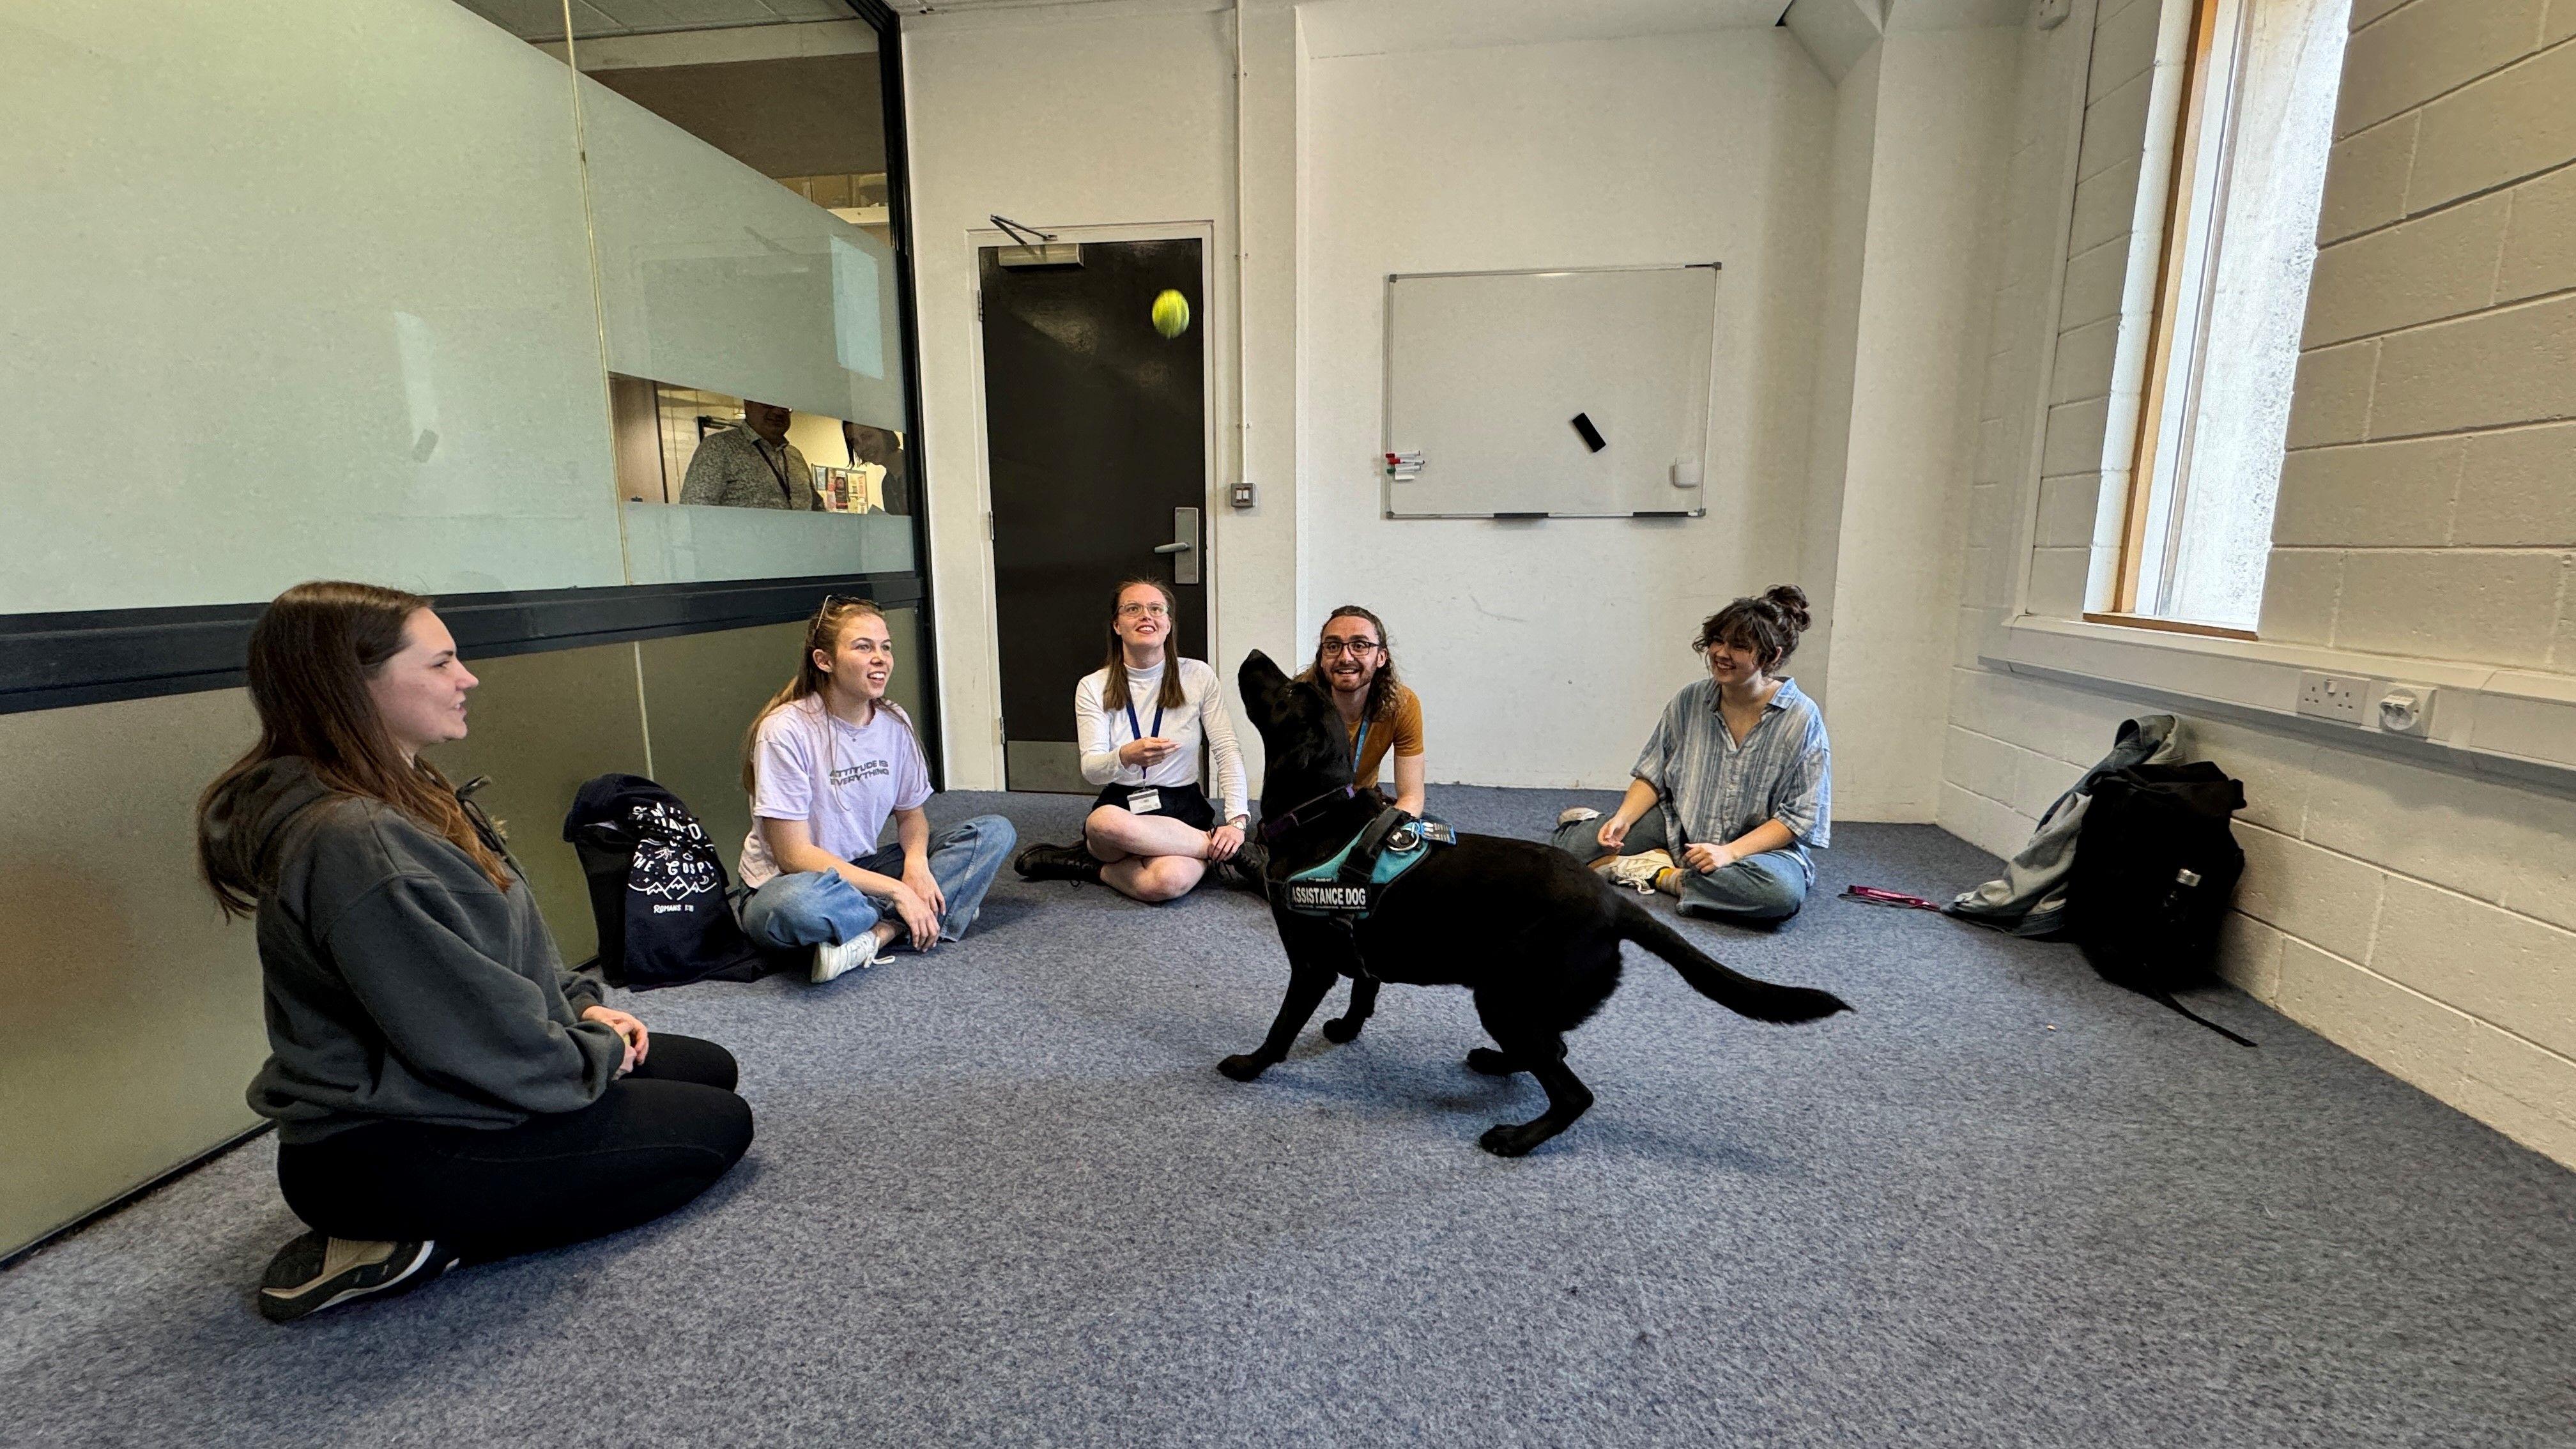 therapy dogs help students' wellbeing during exams